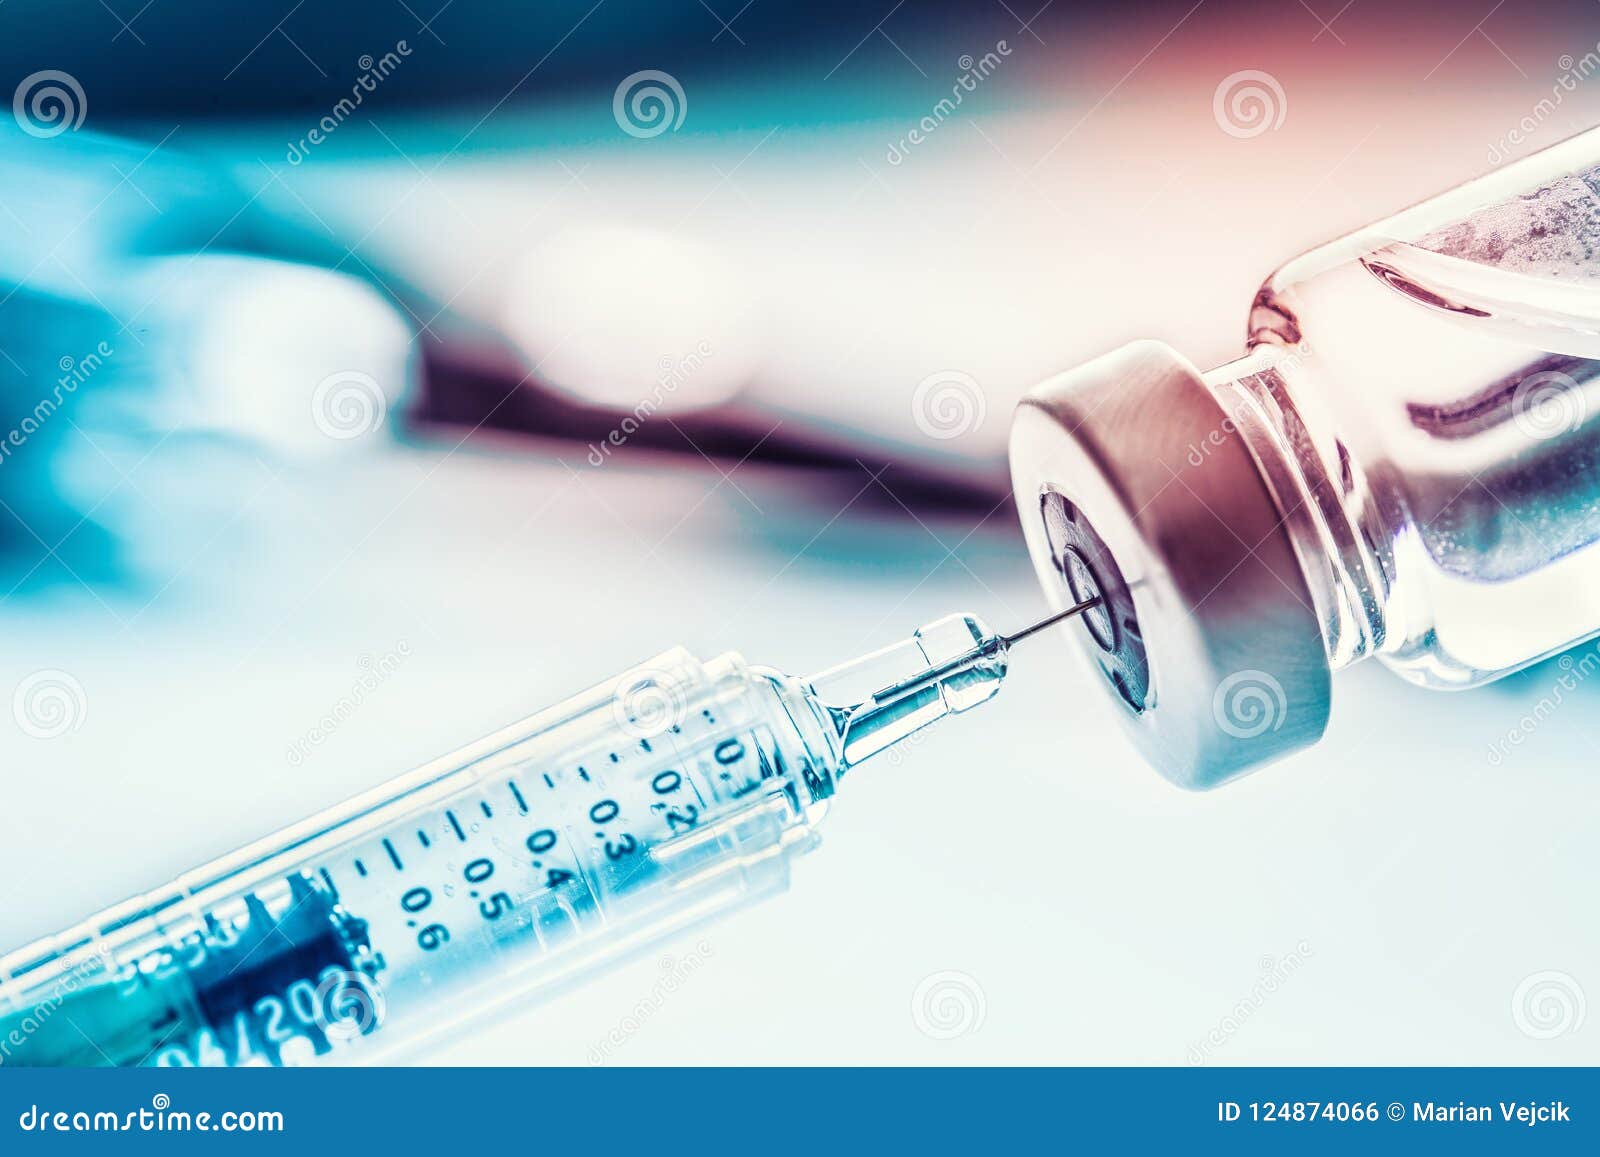 close-up medical syringe with a vaccine